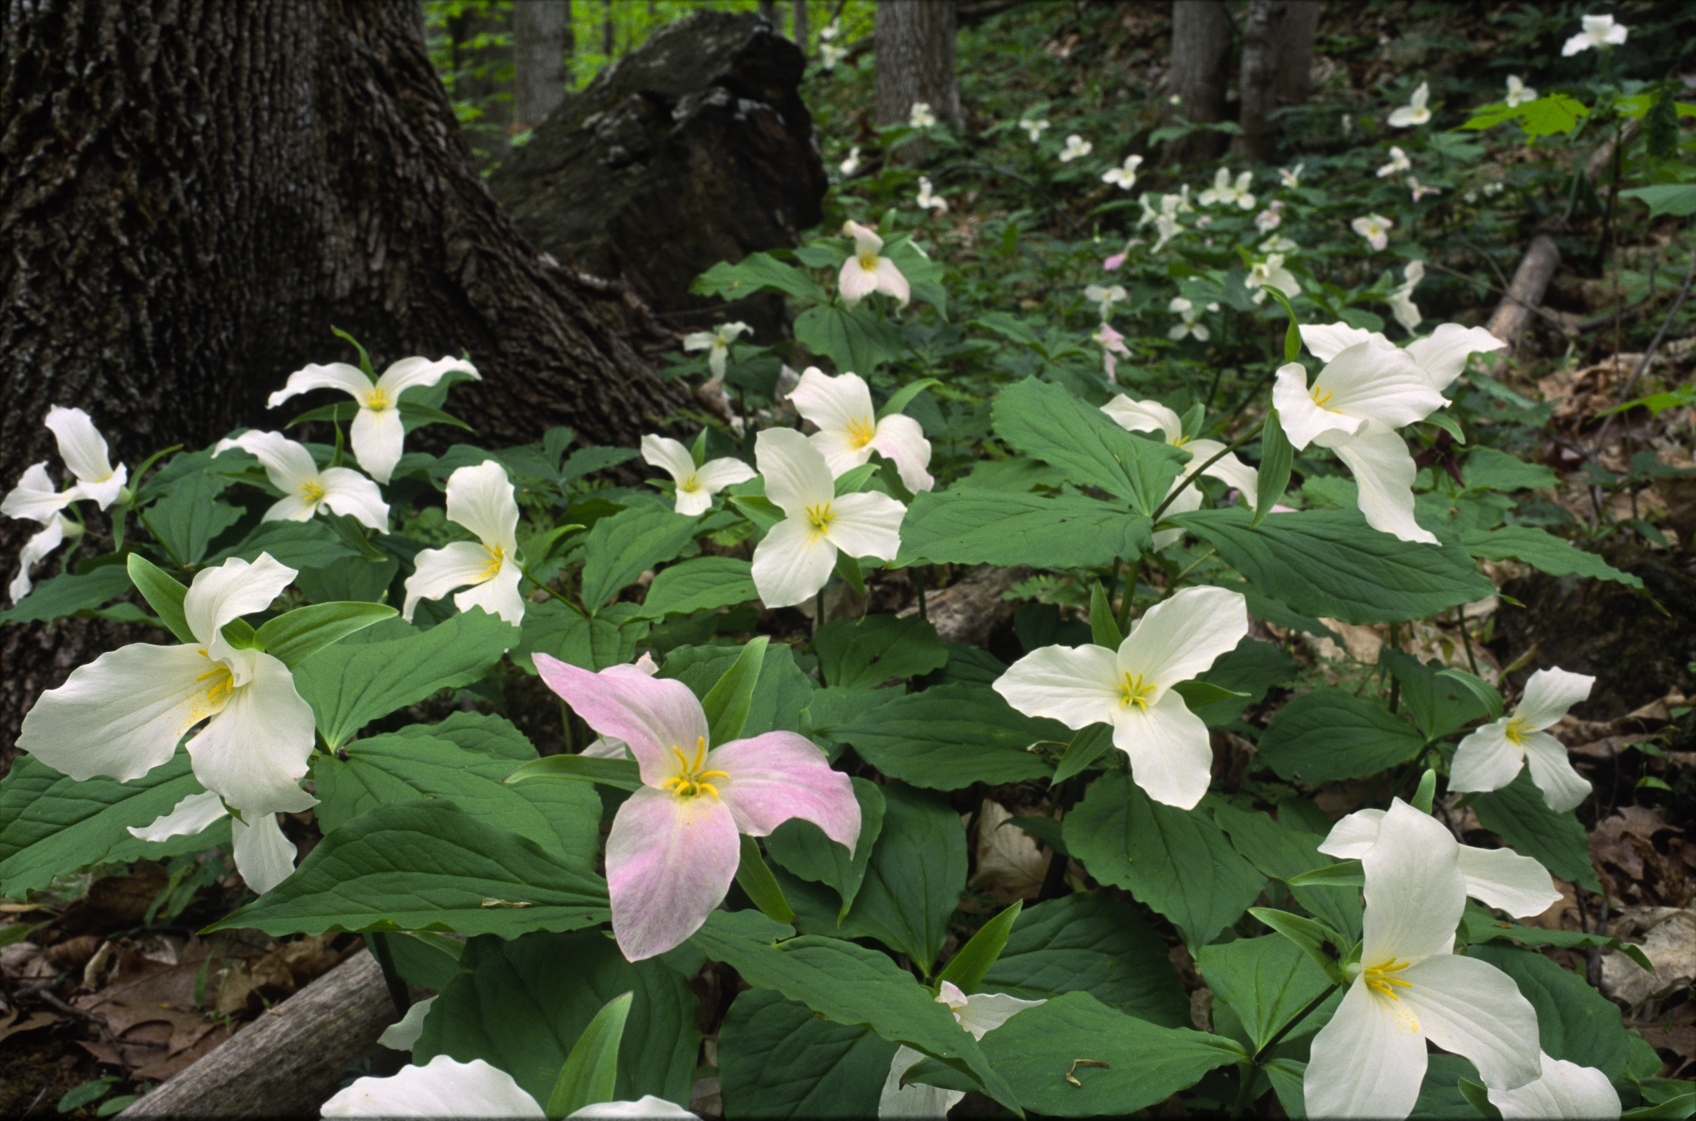 A ground-level view of forest trilliums in spring bloom